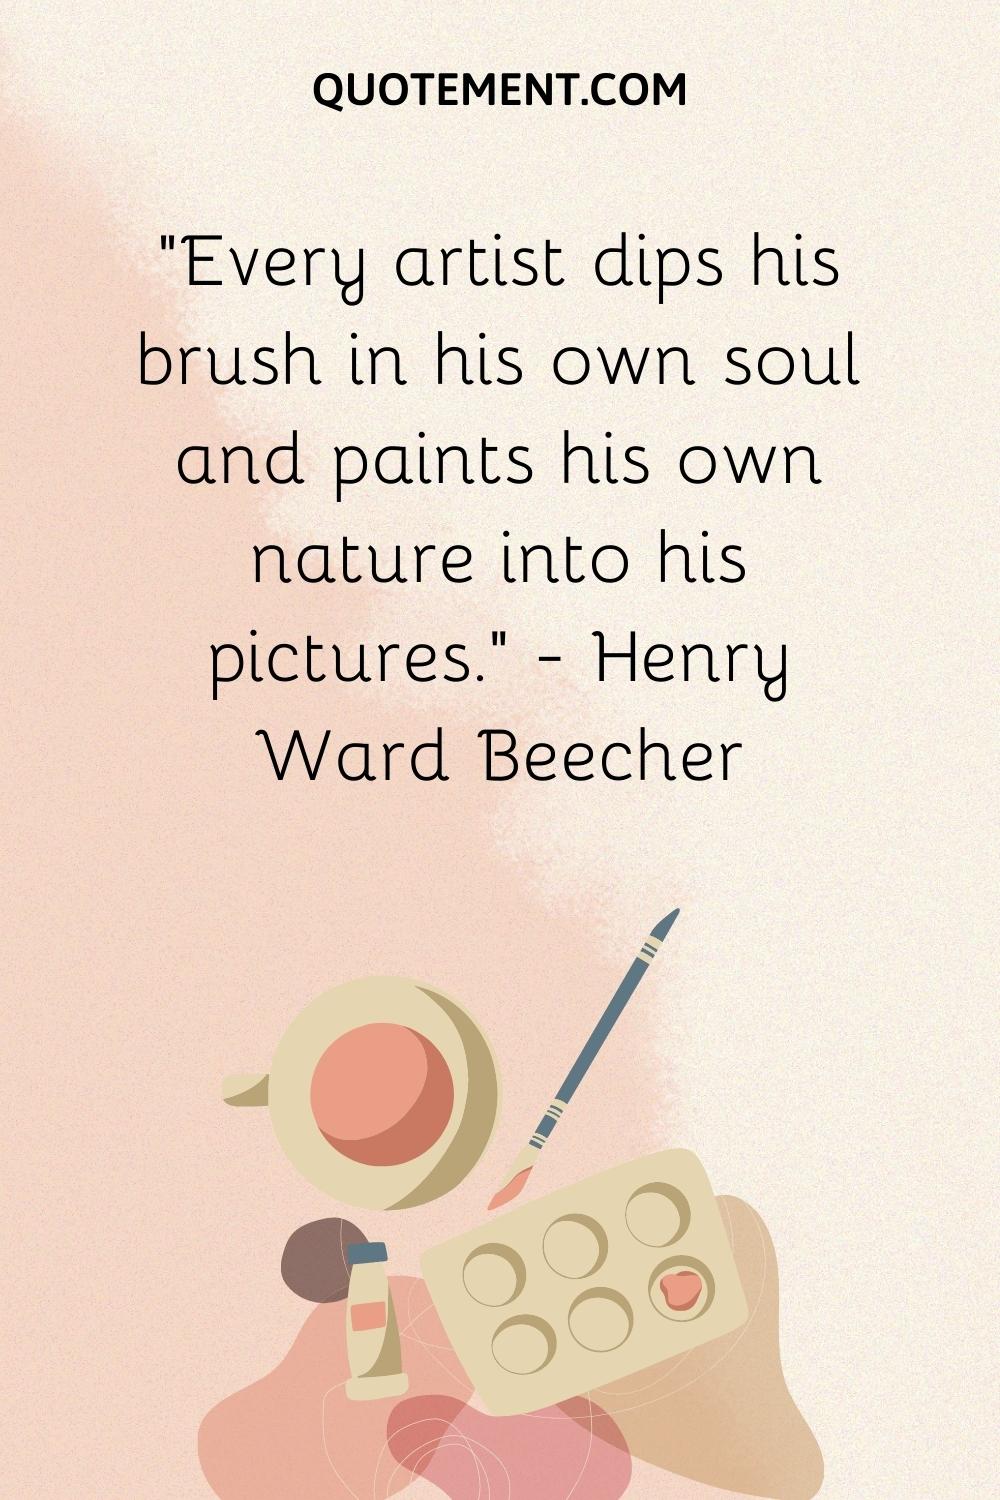 Every artist dips his brush in his own soul and paints his own nature into his pictures